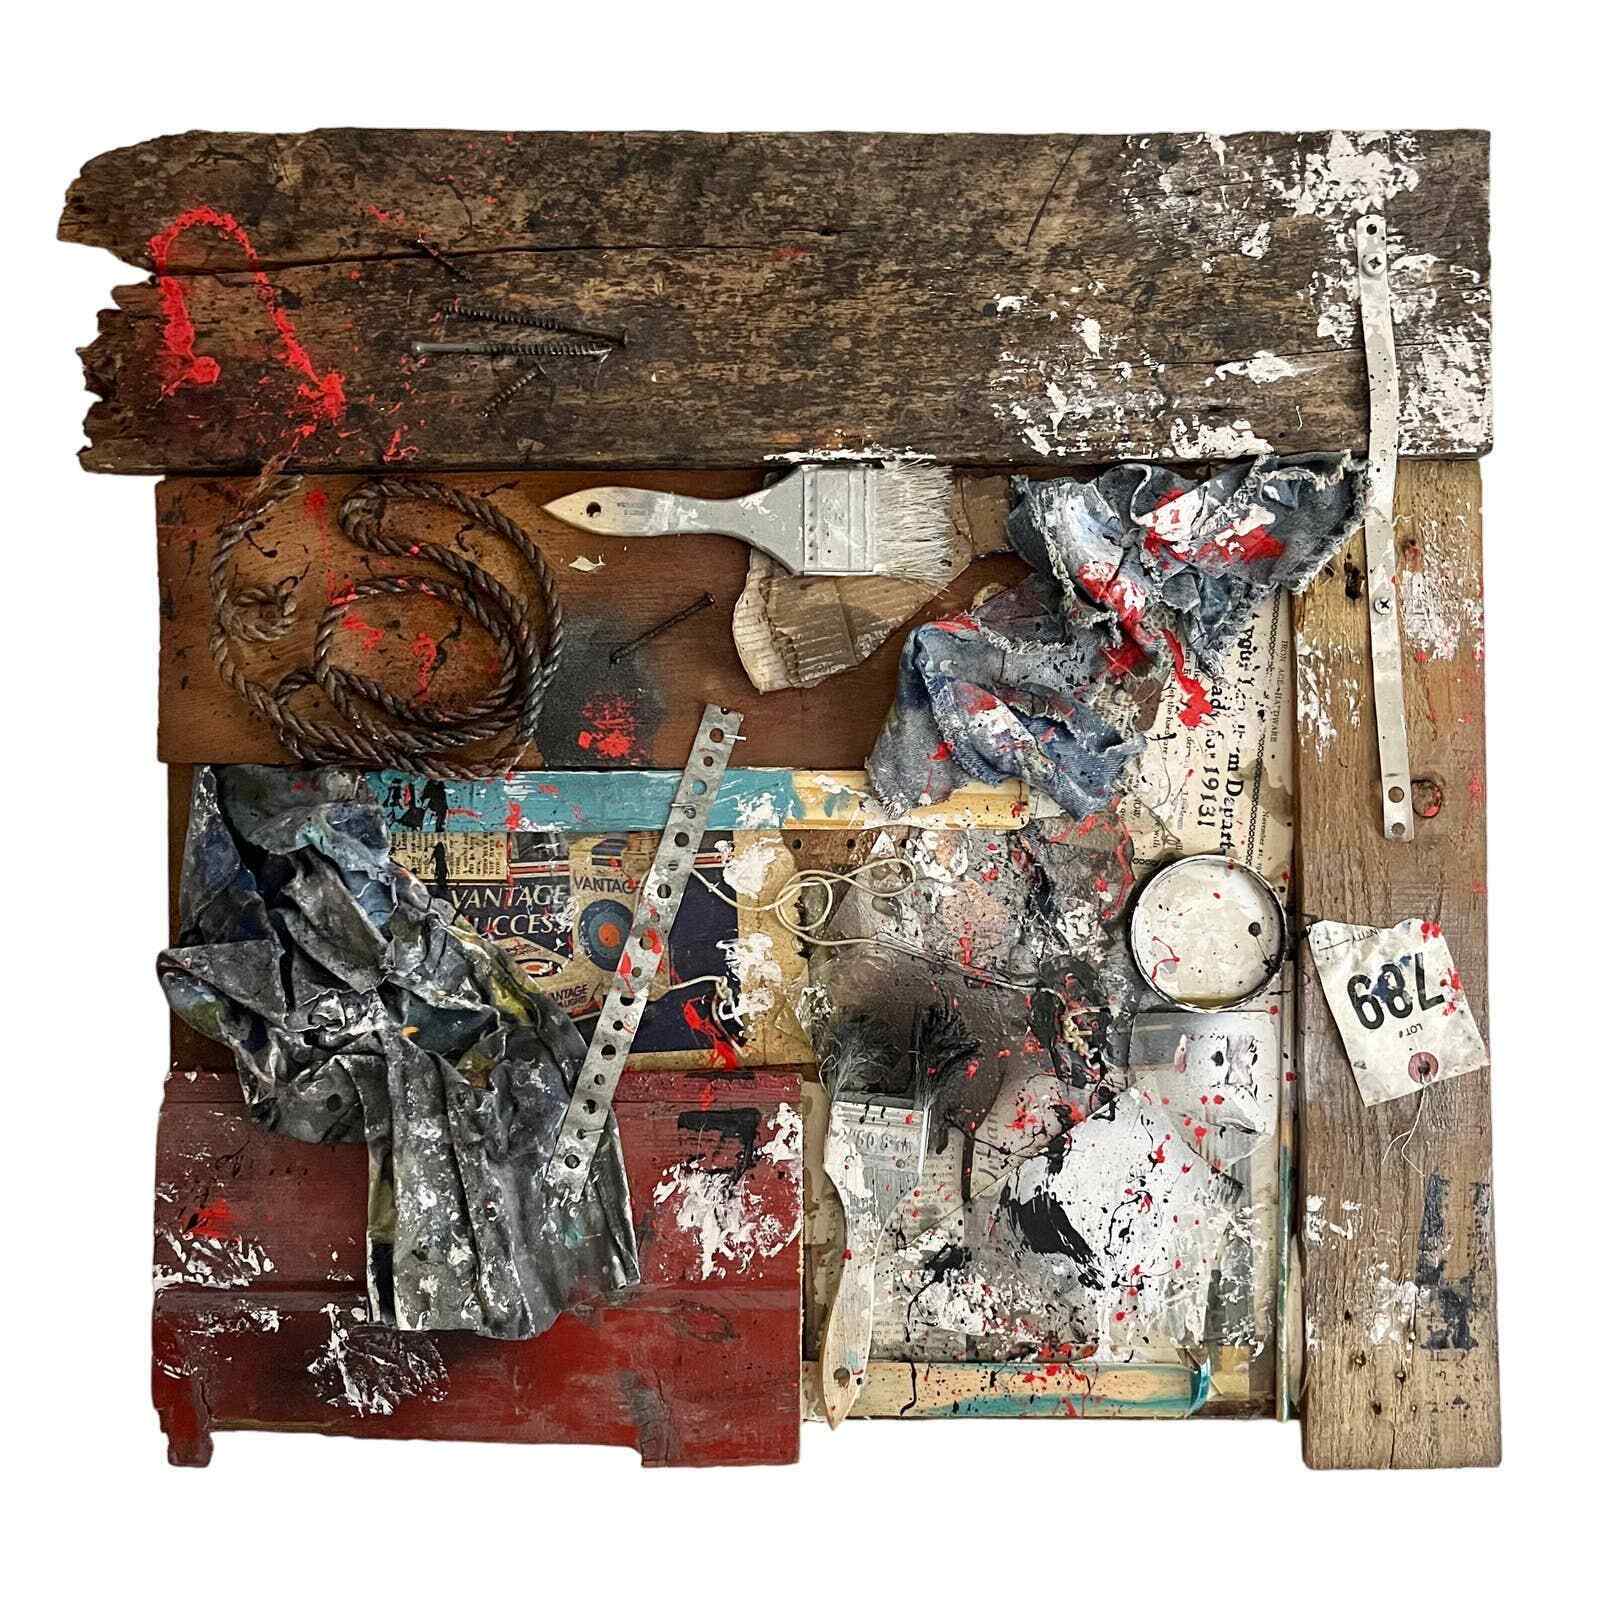 'FOUND OBJECT' - Original Framed Abstract Art Found Object Assemblage Collage.